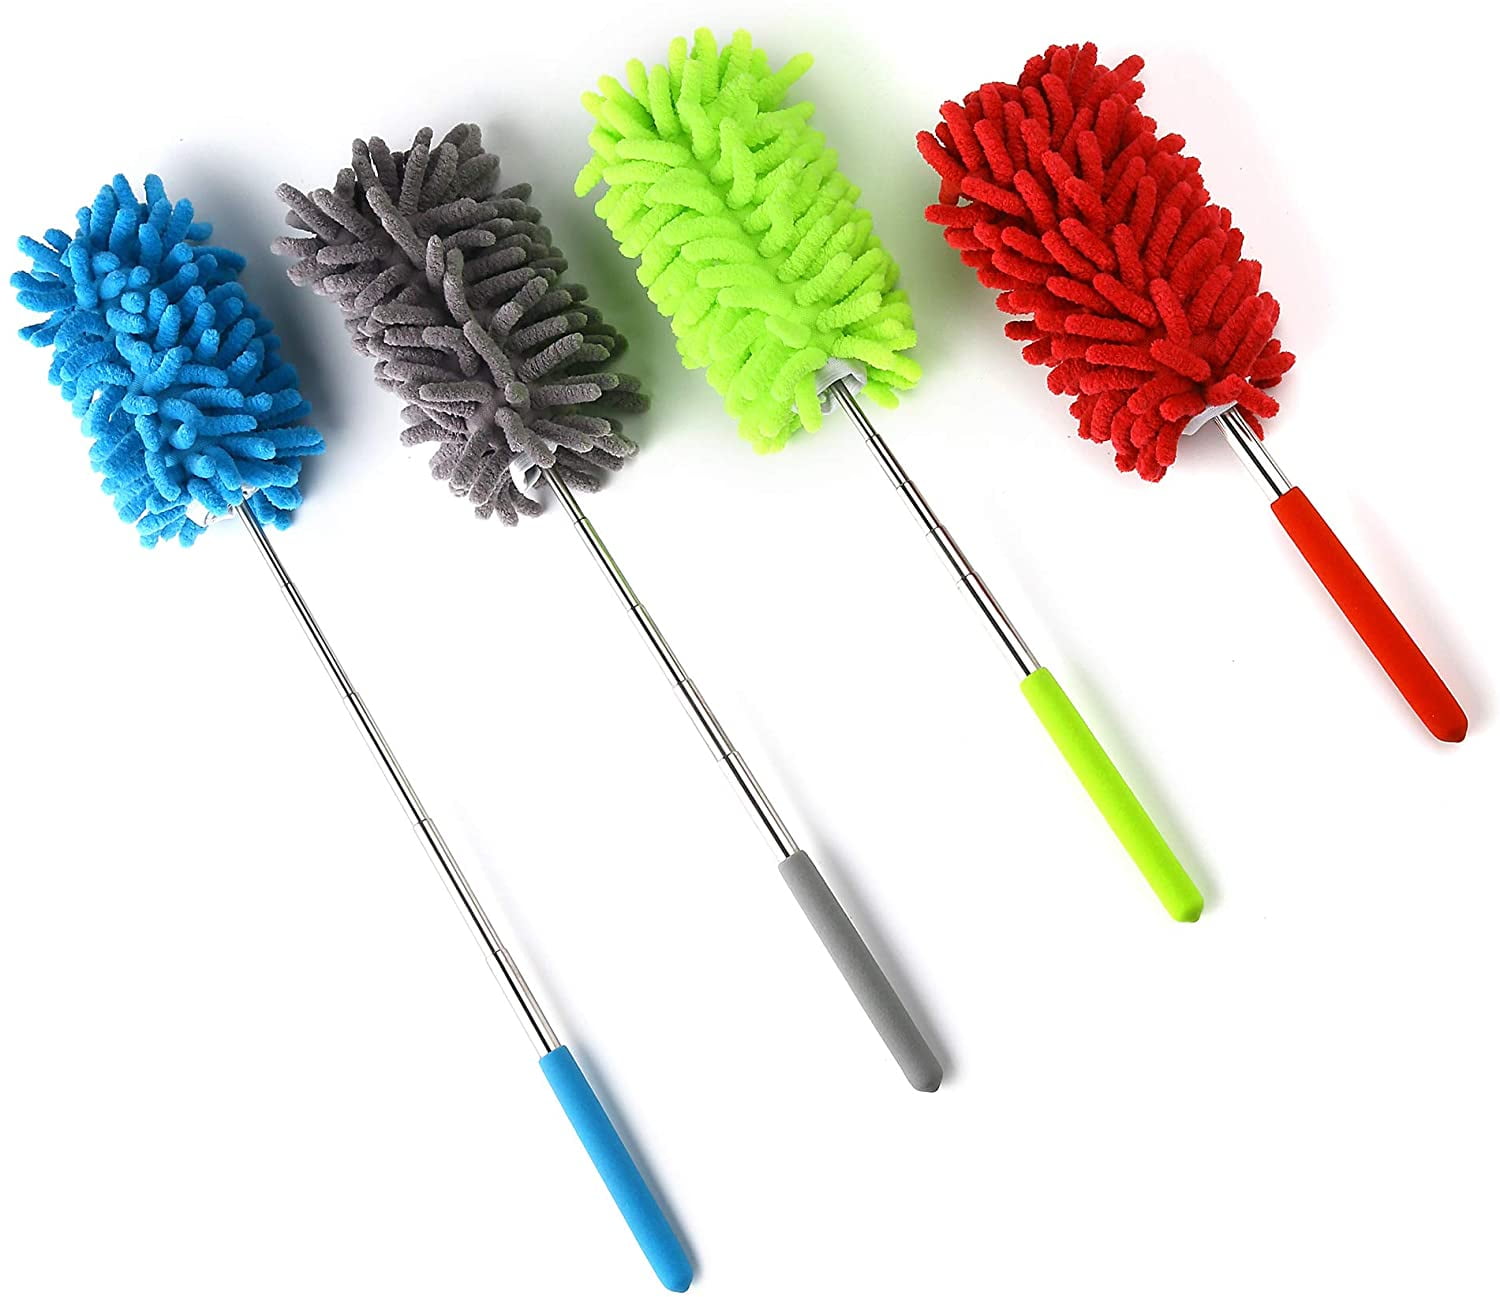 Cleaning Home Air-condition Duster Brush Cleaning Brushes Telescopic Microfiber 